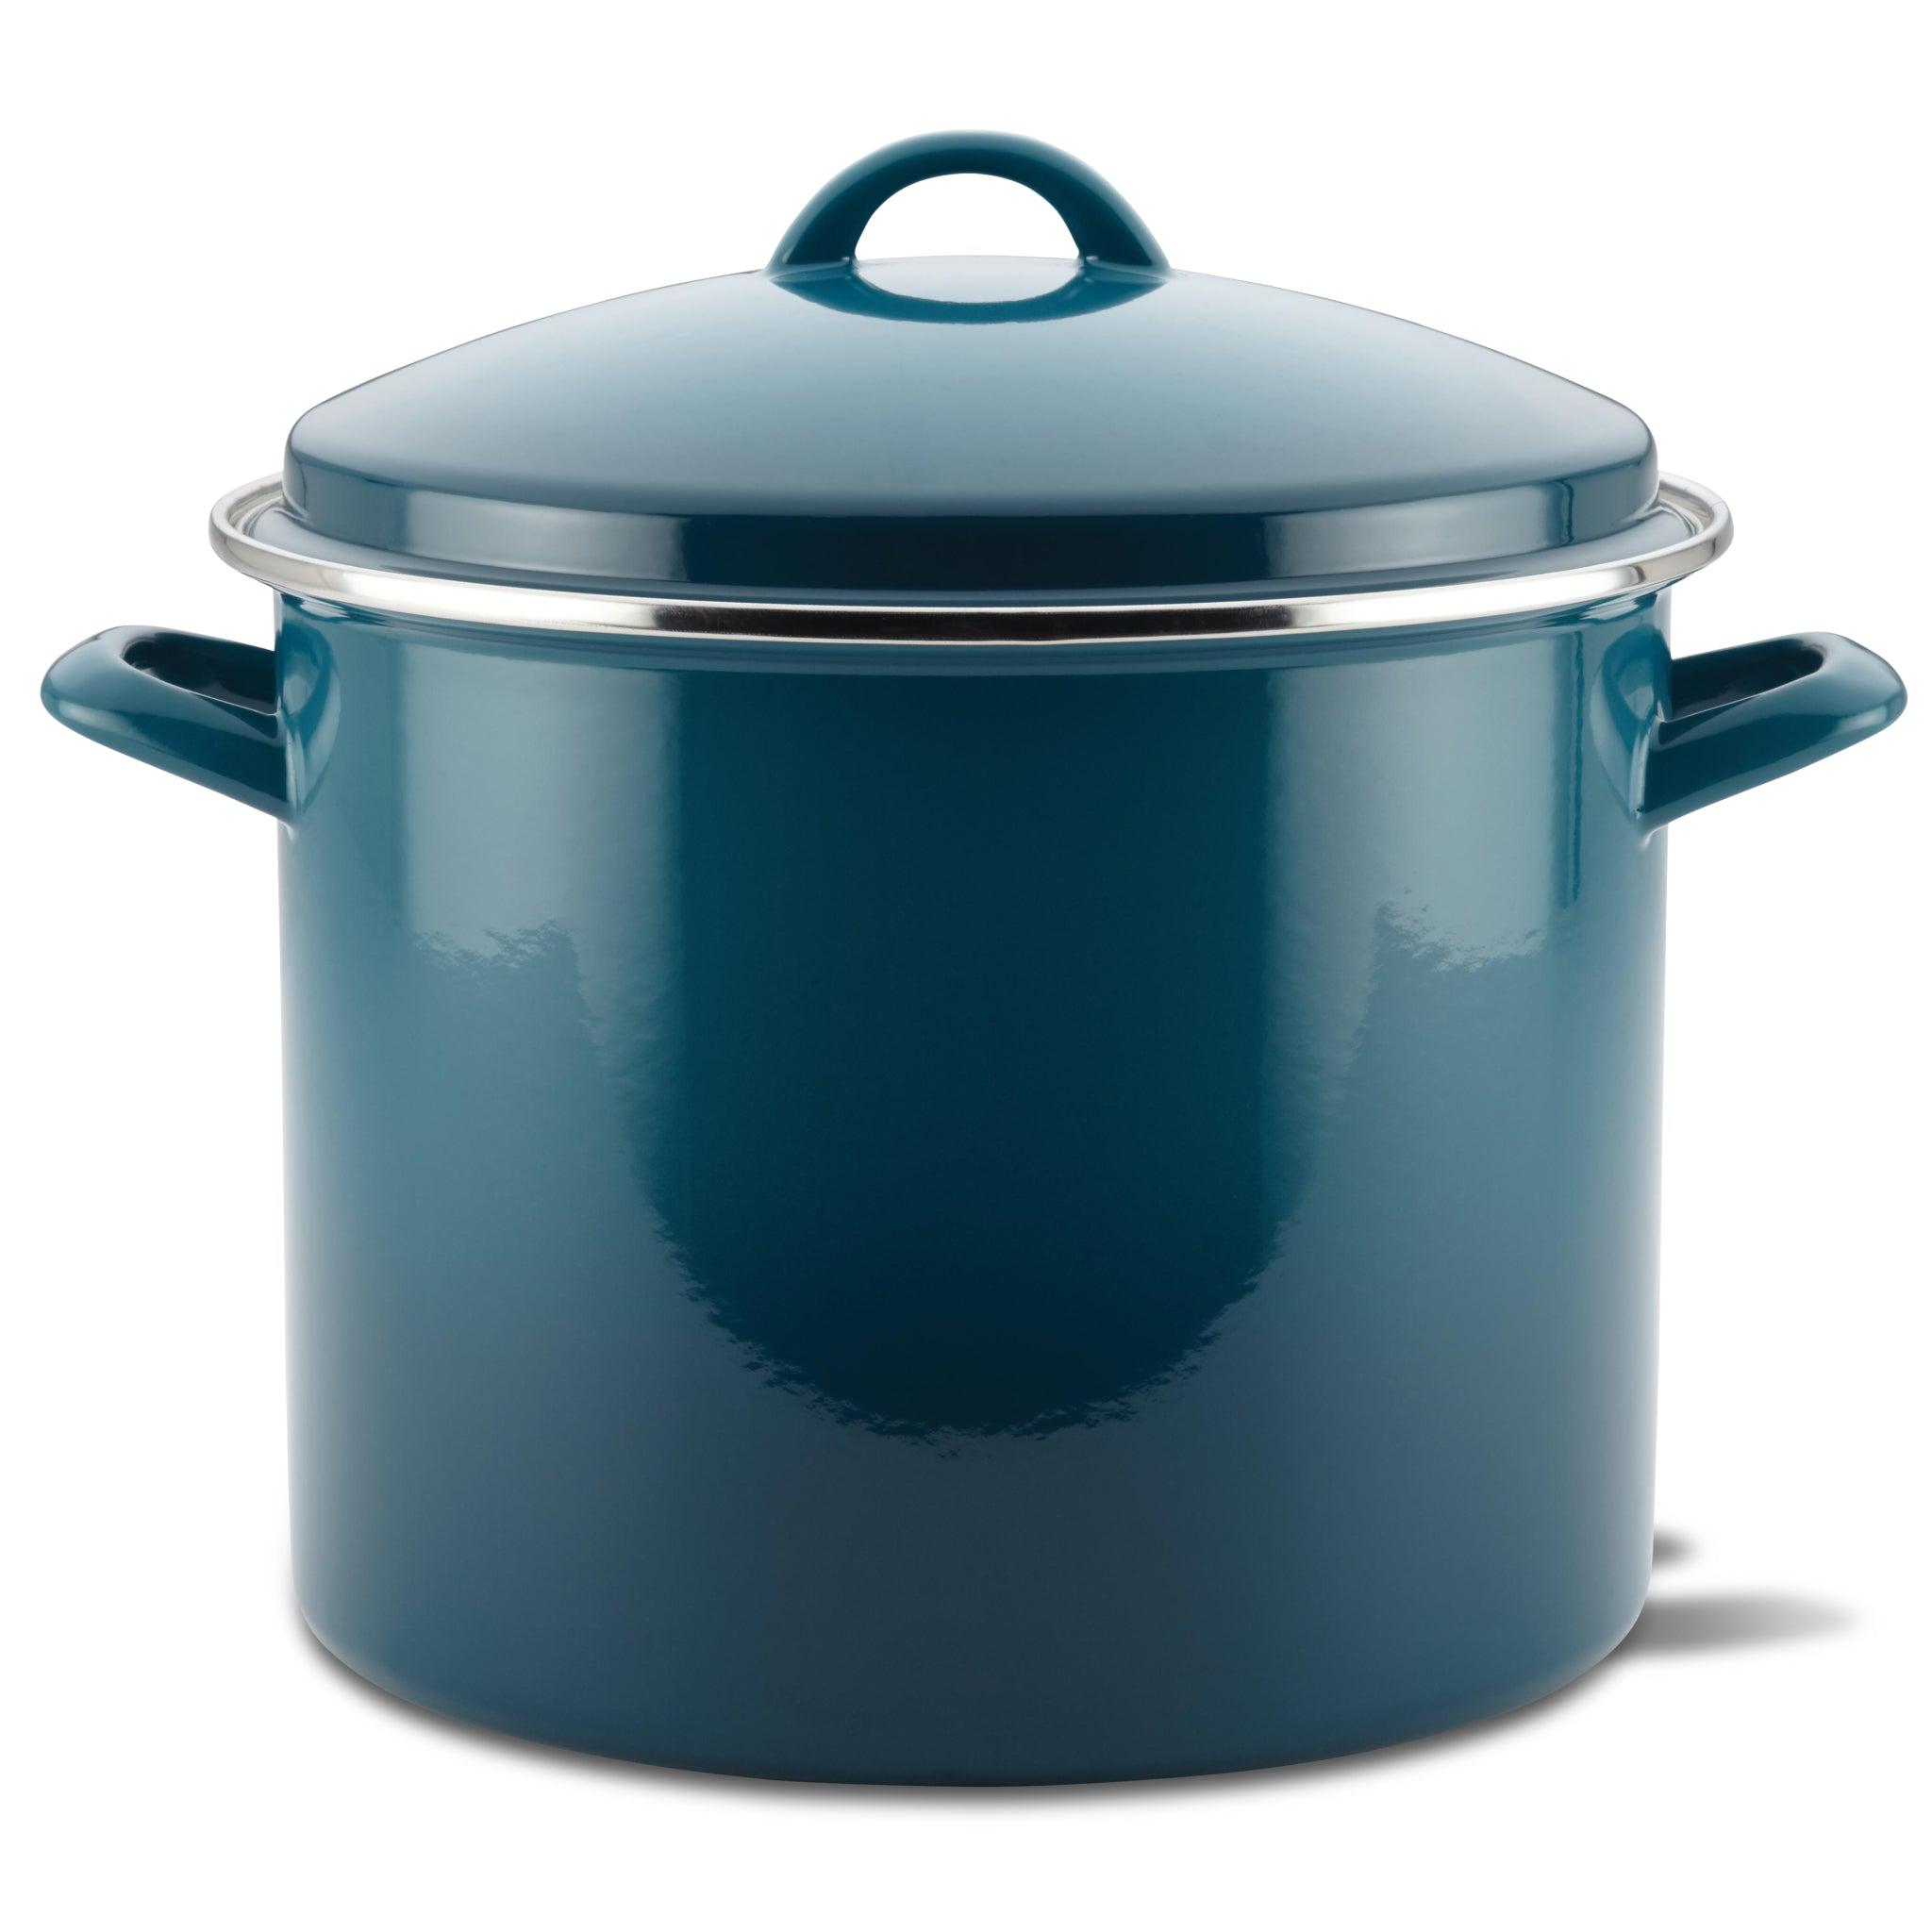 Cookware 12-Quart Covered Stockpot with Lid | Marine Blue